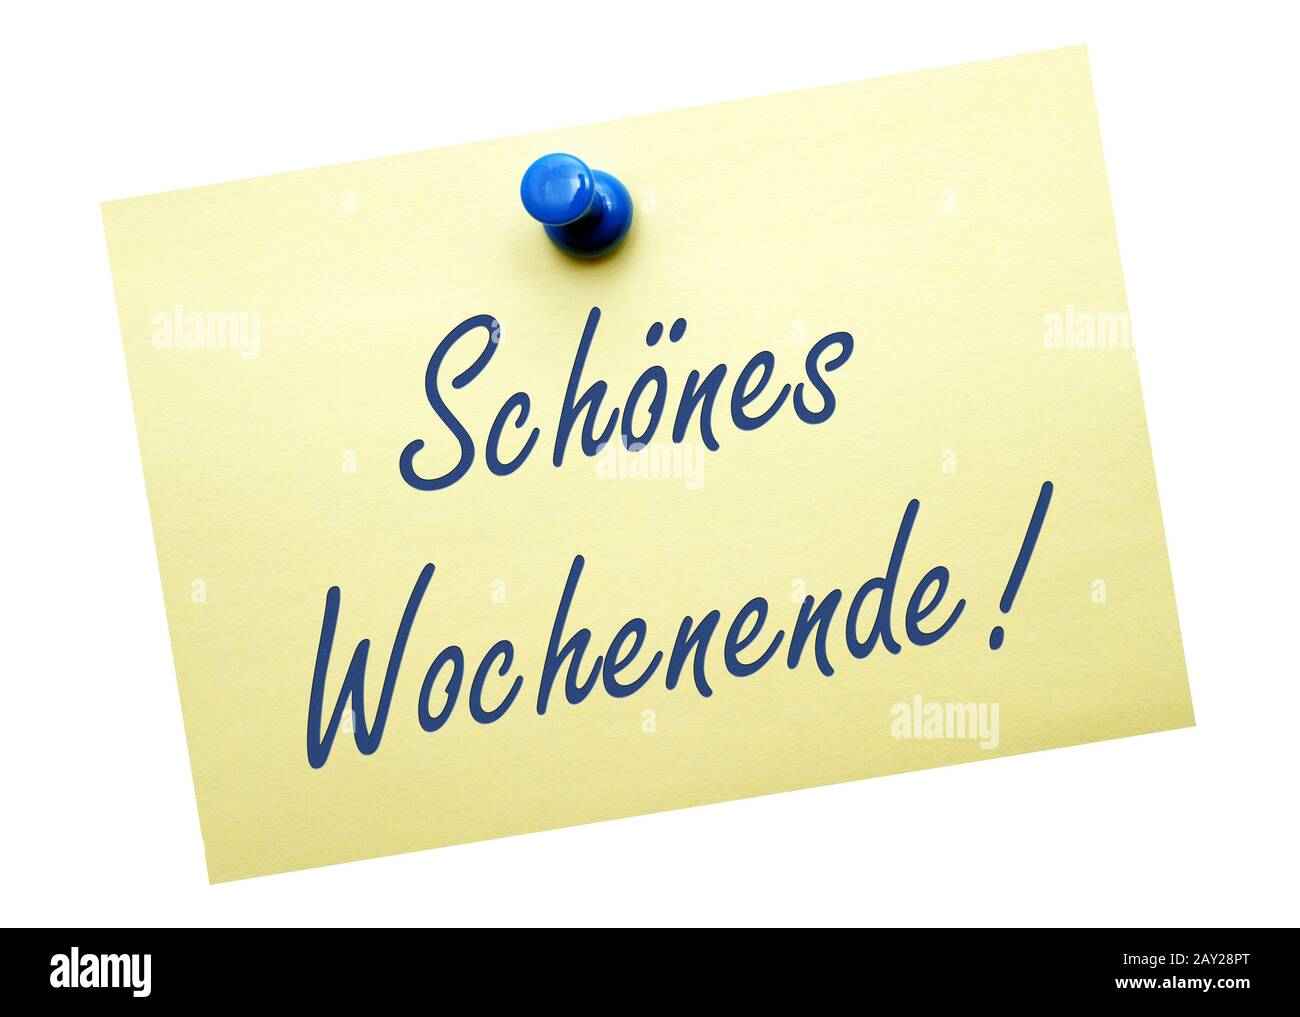 Have a nice weekend ! Stock Photo